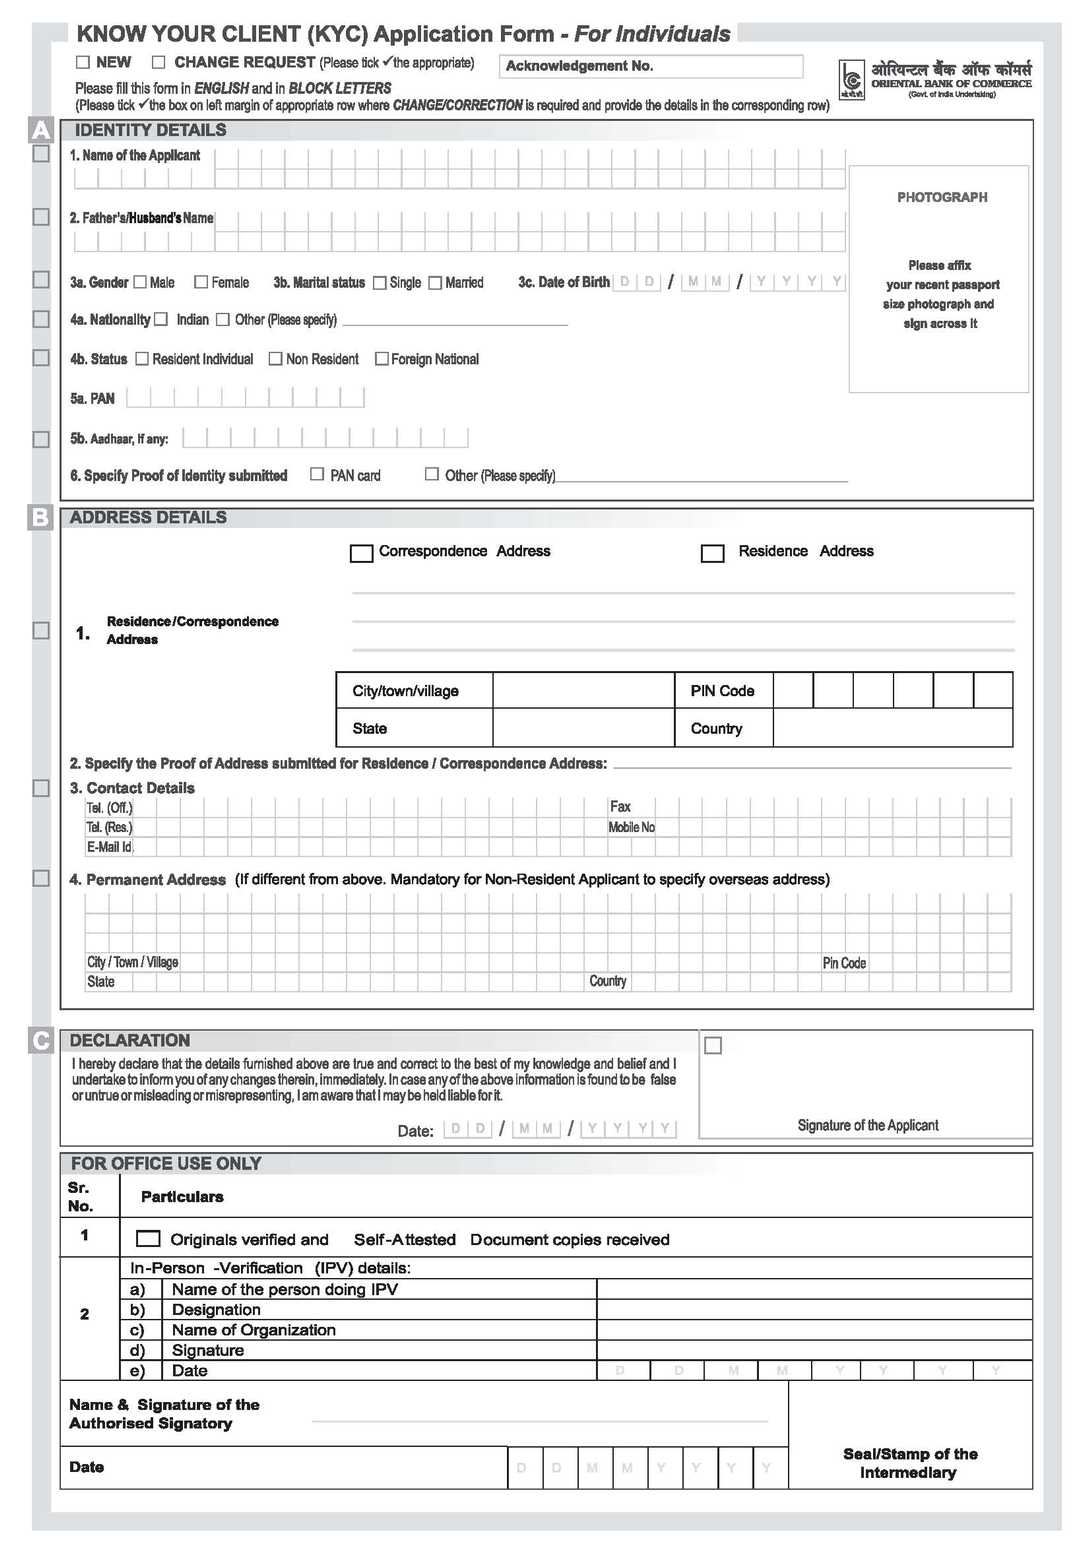 kyc form of united bank of india pdf